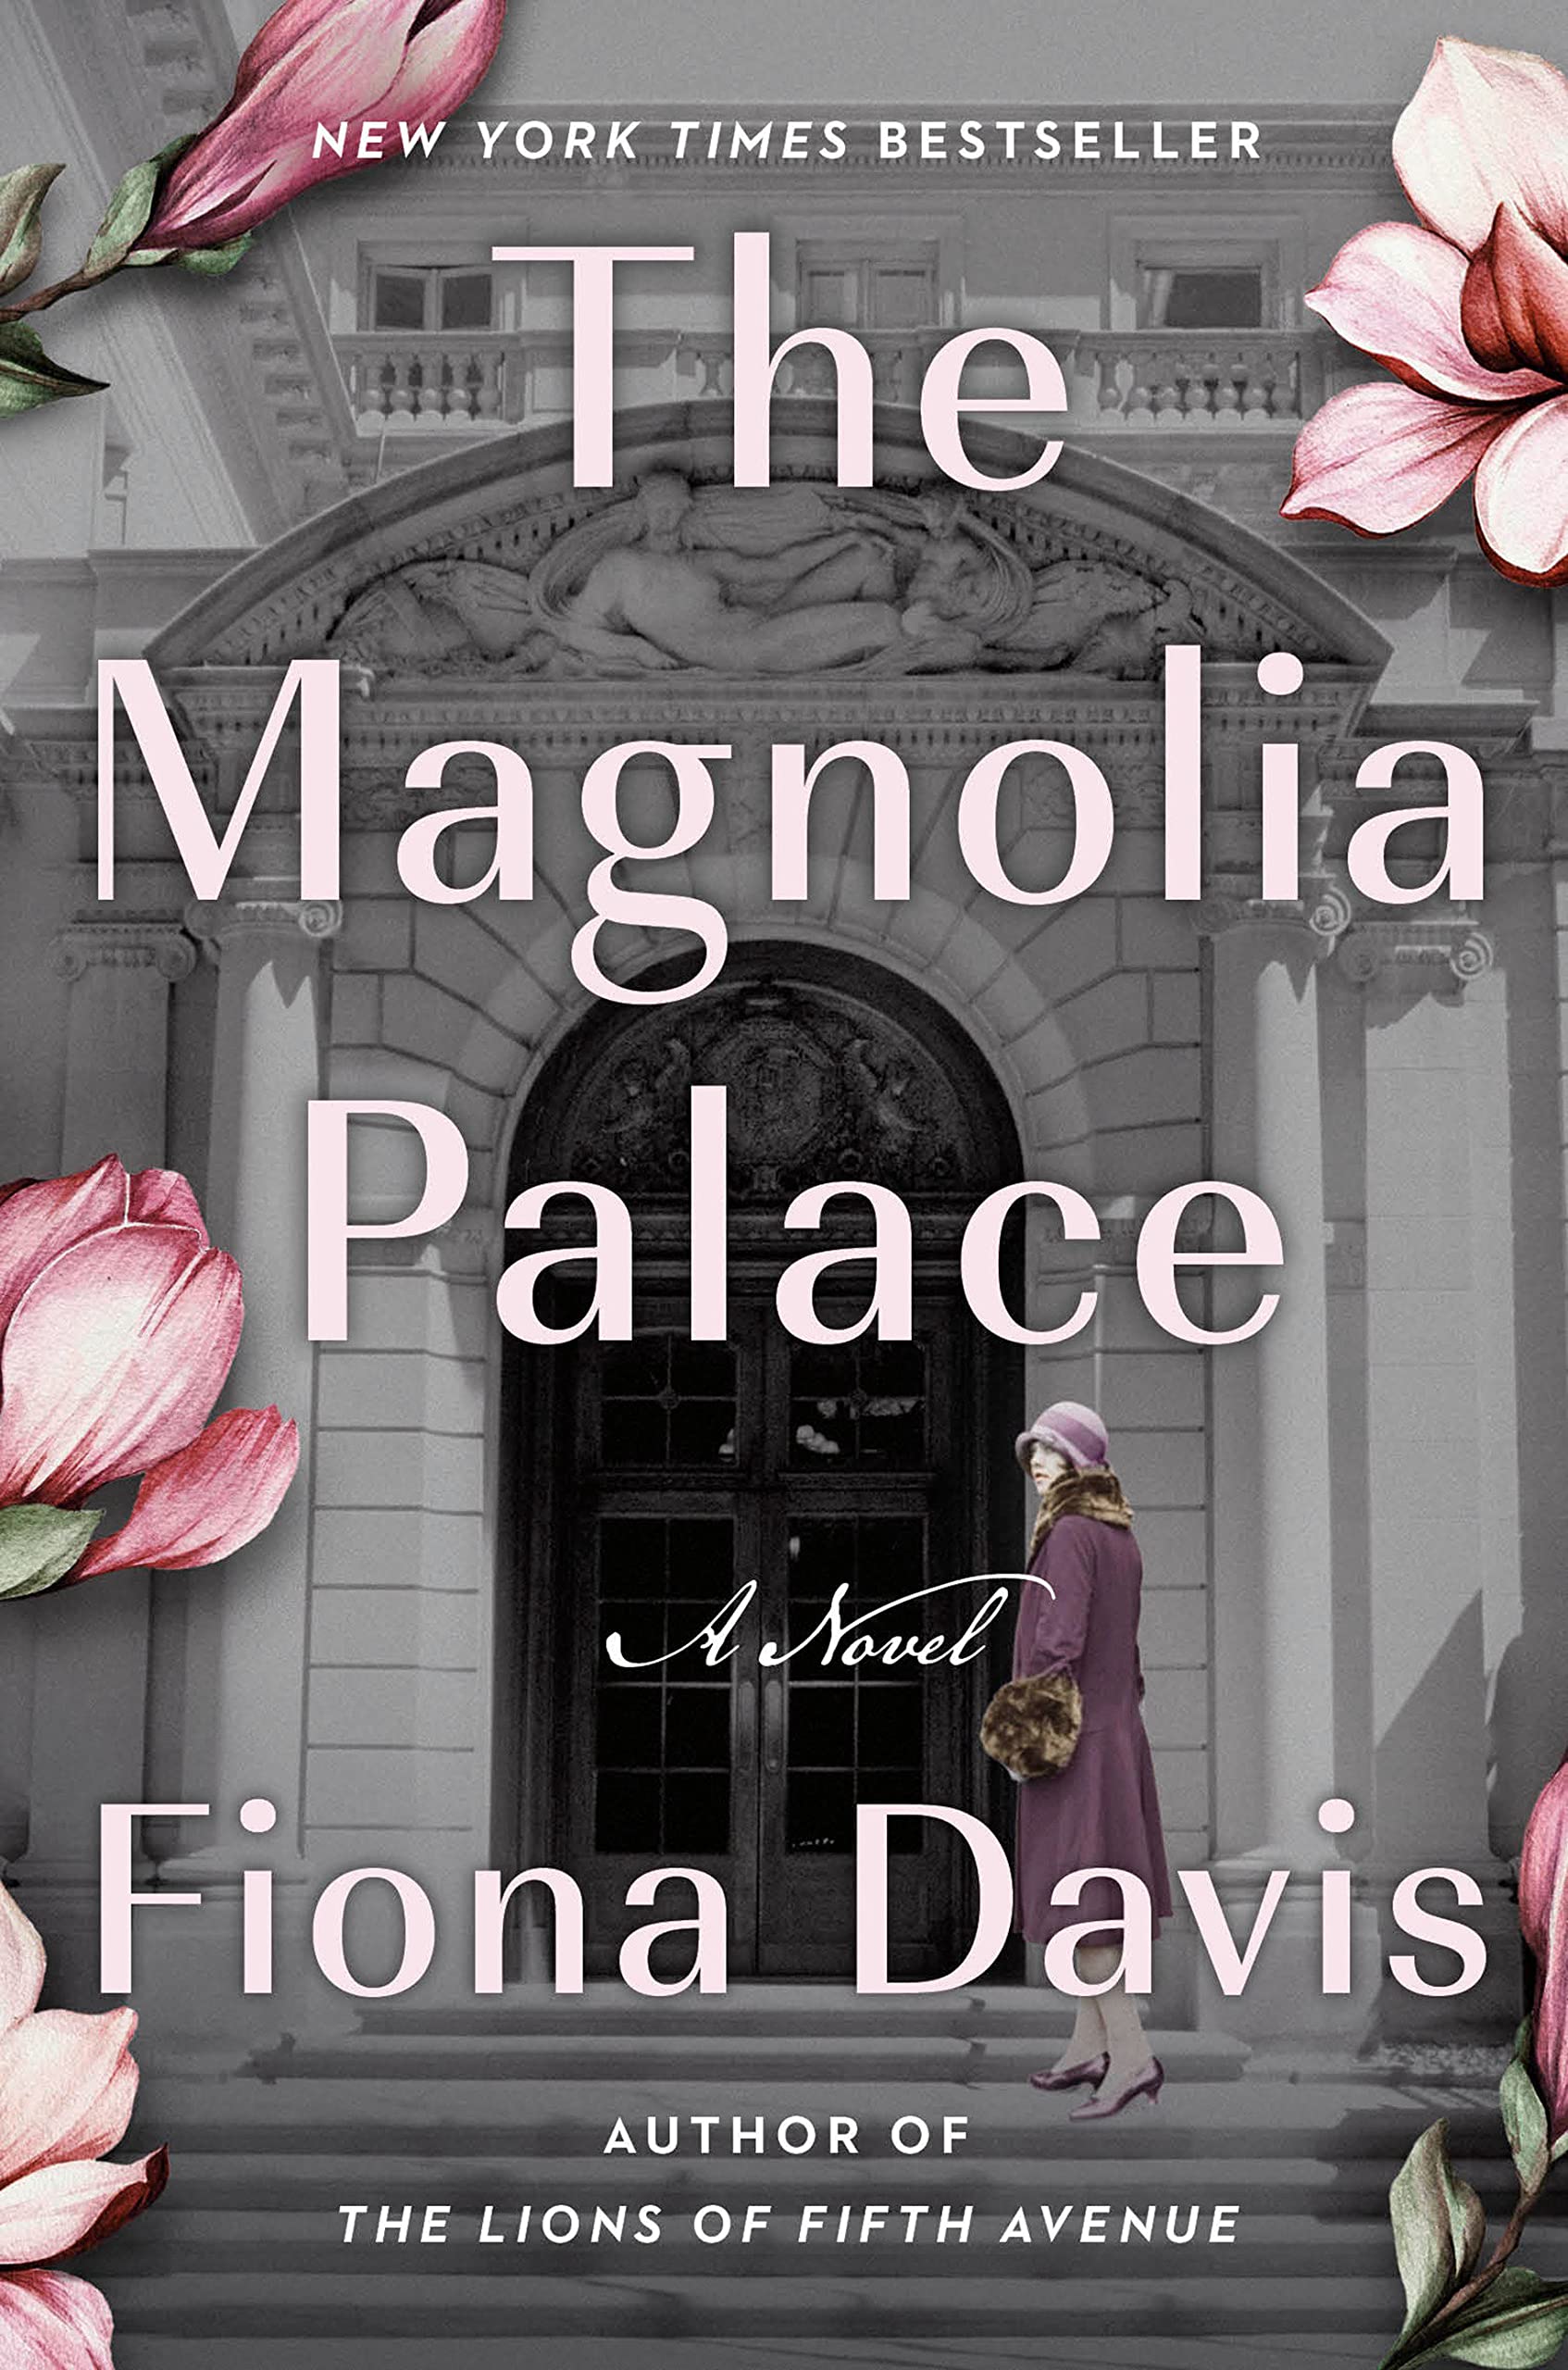 Book Cover for the book Magnolia Palace by Fiona Davis featuring a beautiful old building front with large arched glass doors. A lady in a plum color coat with a fur collar and muff standing on the front stone steps. Pink Magnolias placed in random places on the cover.